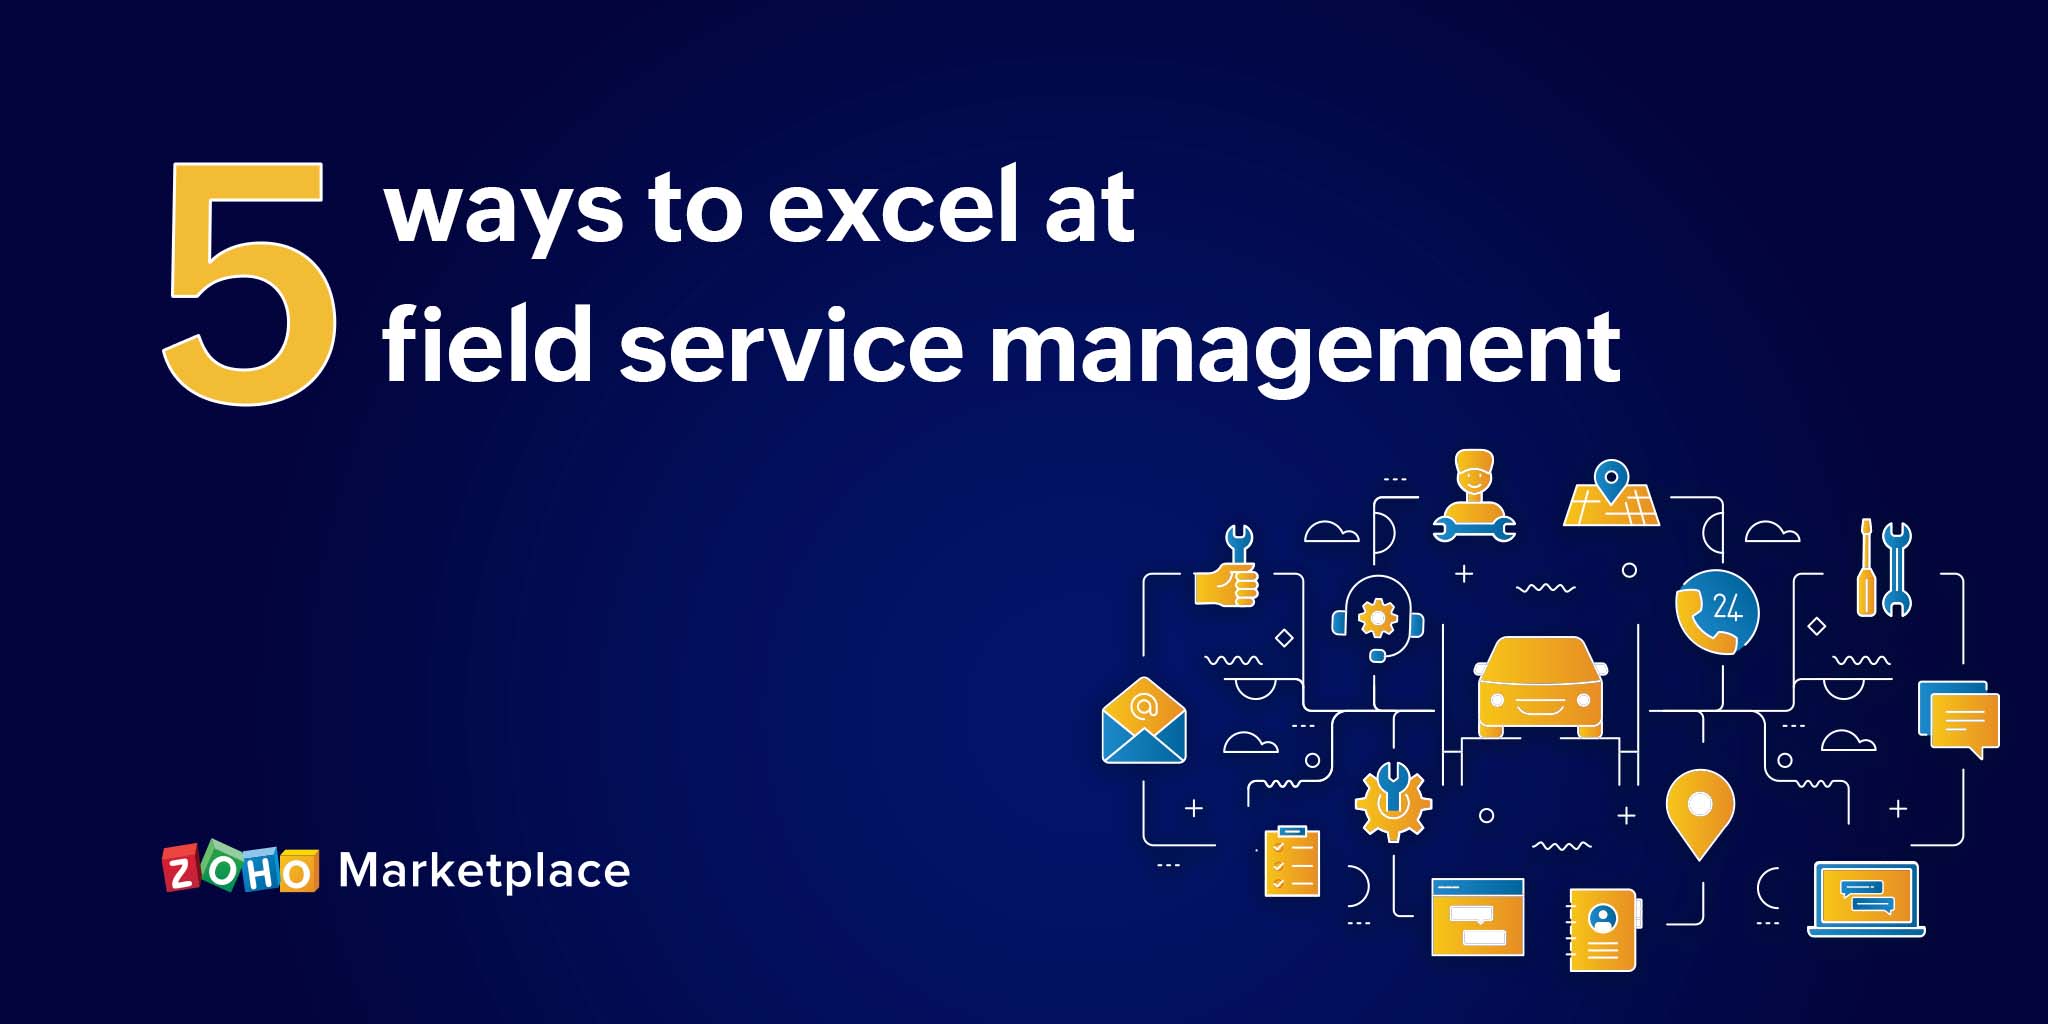 ProTips: 5 ways to excel at field service management